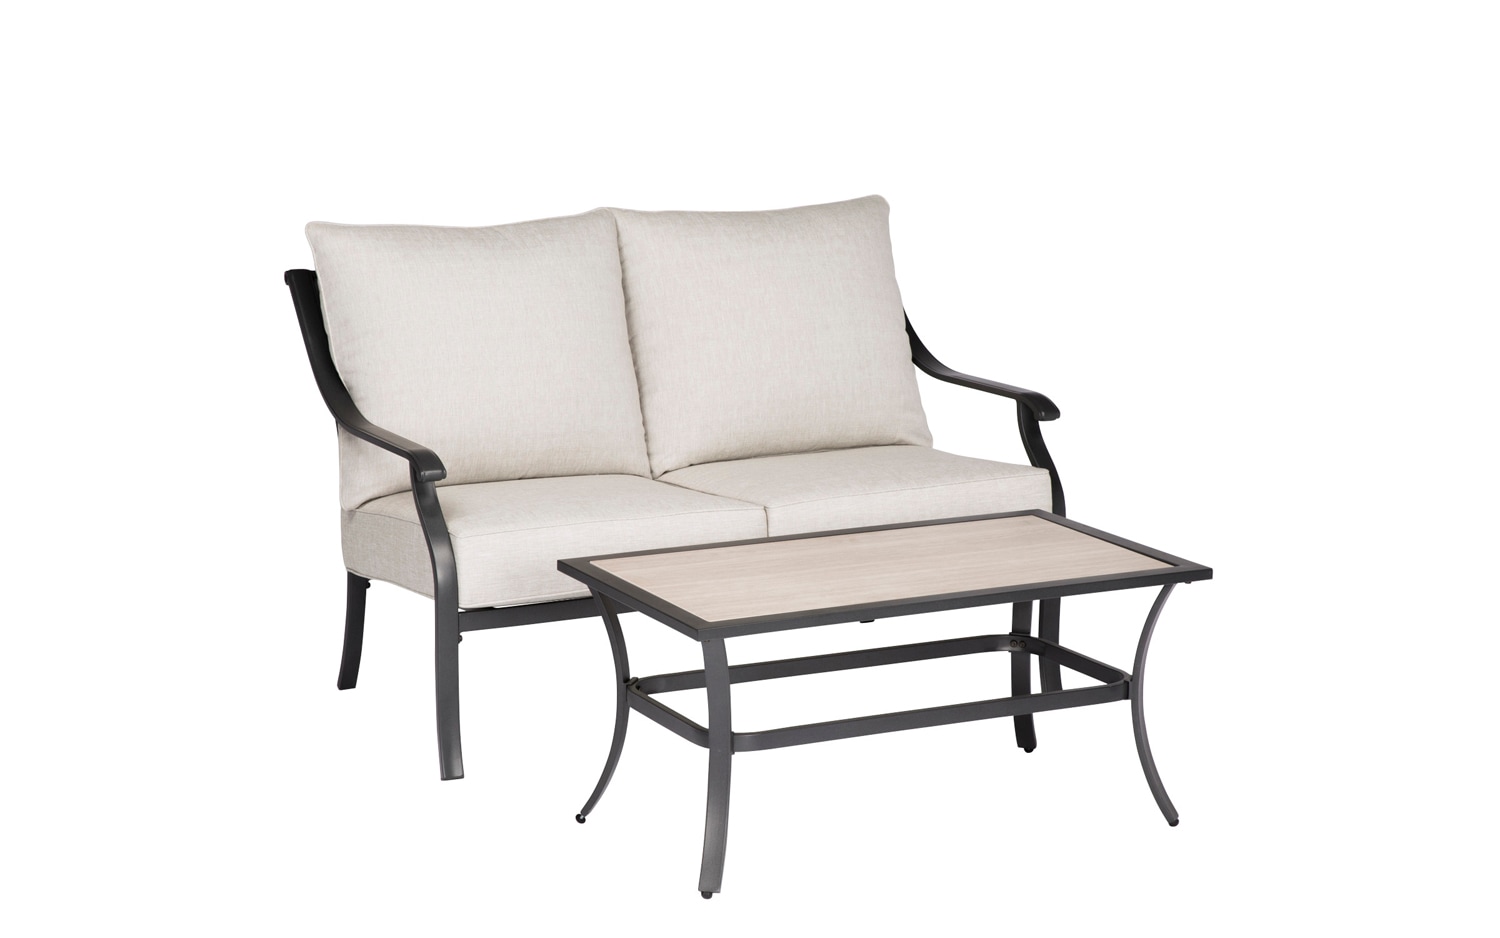 Patio Furniture Sets At Lowes.Com